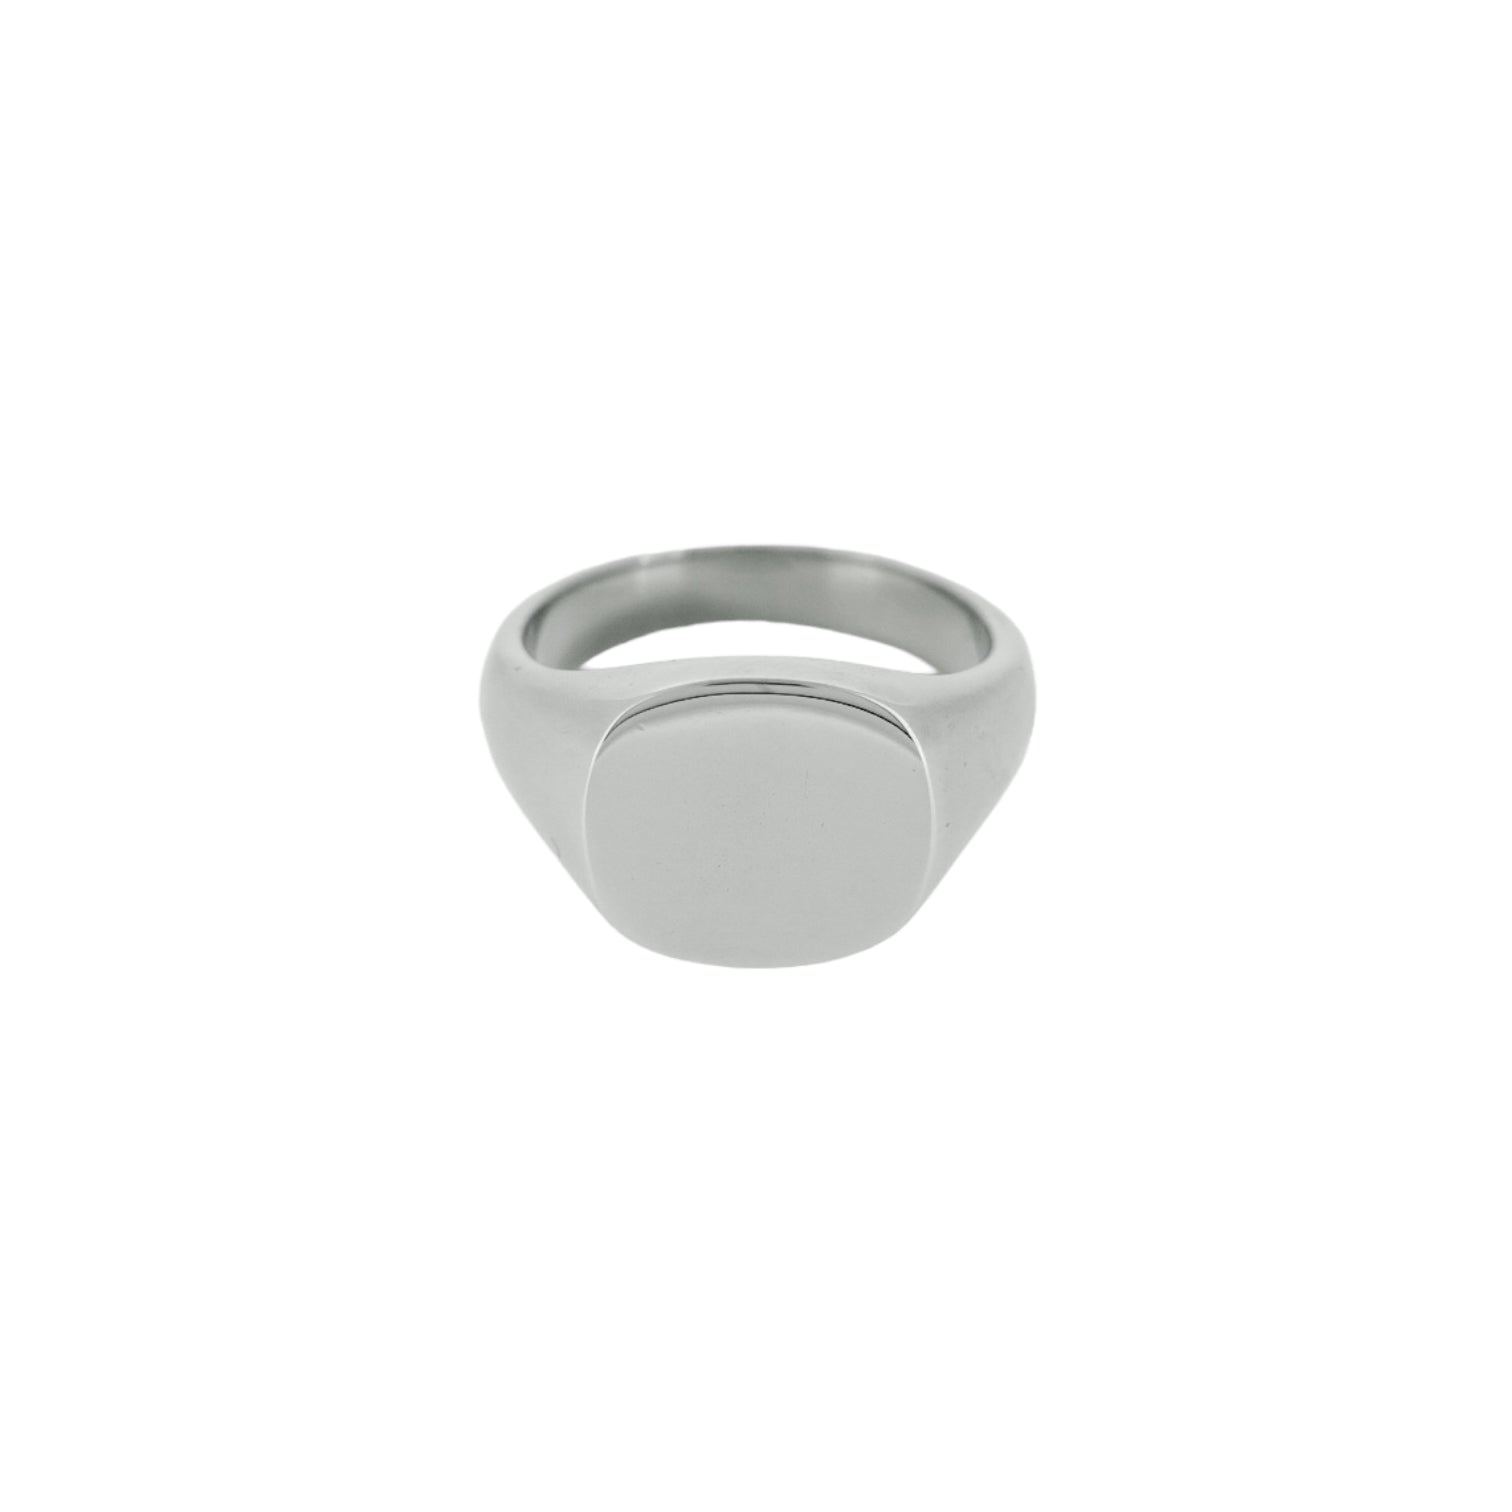 Silver signet ring for men, plain polished silver ring, perfect gift for him